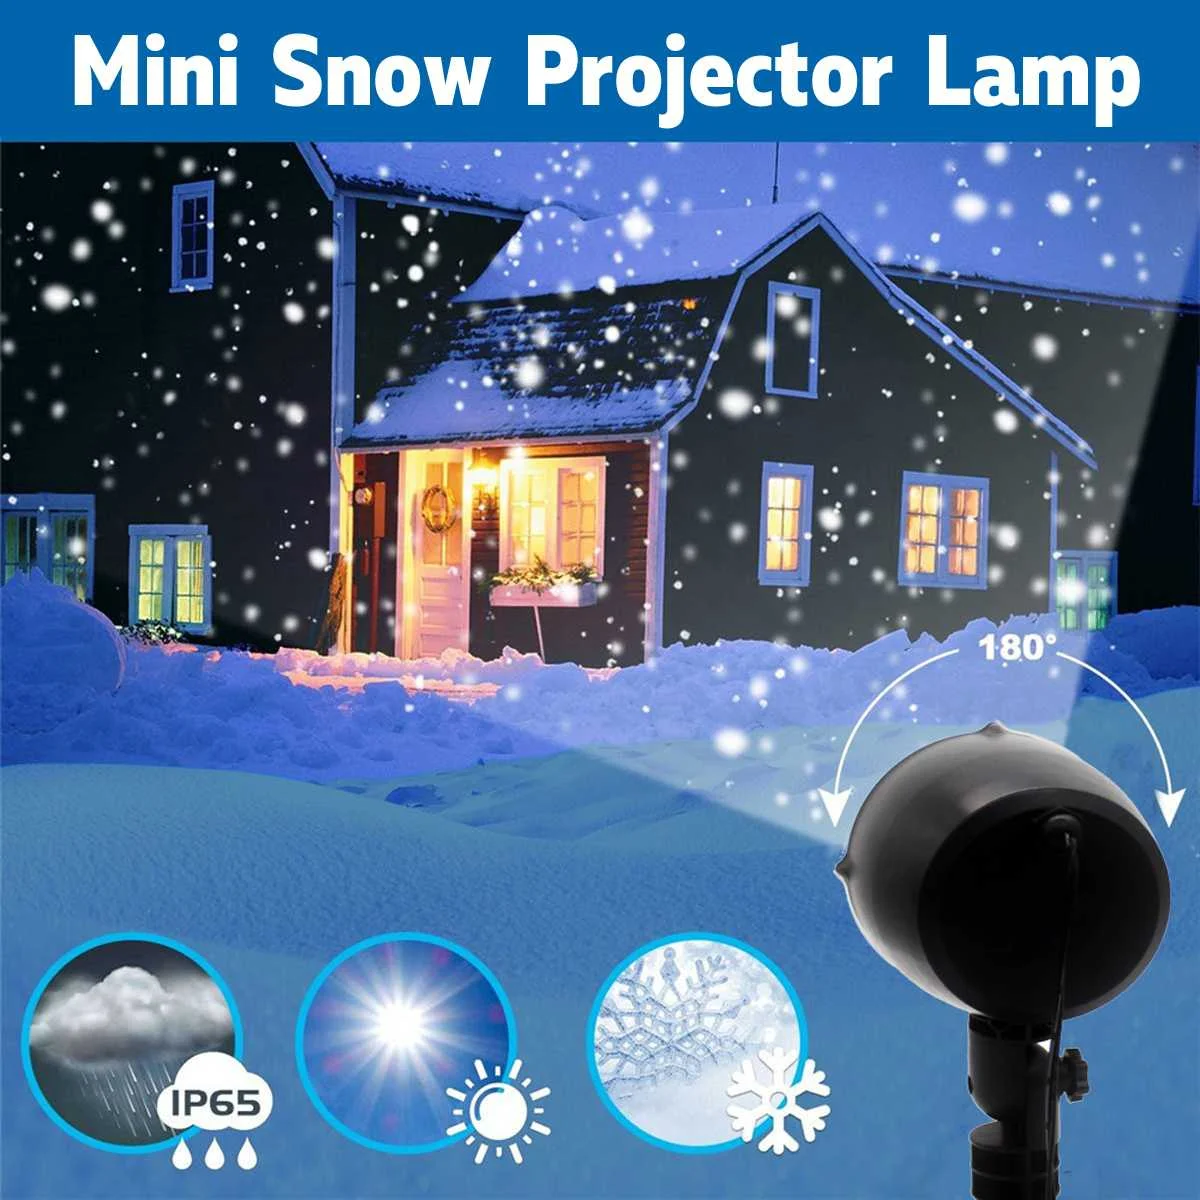 

Mini Snowfall Projector IP65 Moving Snow Outdoor Garden Laser Projector Lamp Christmas Snowflake Laser Light For Xmas Party